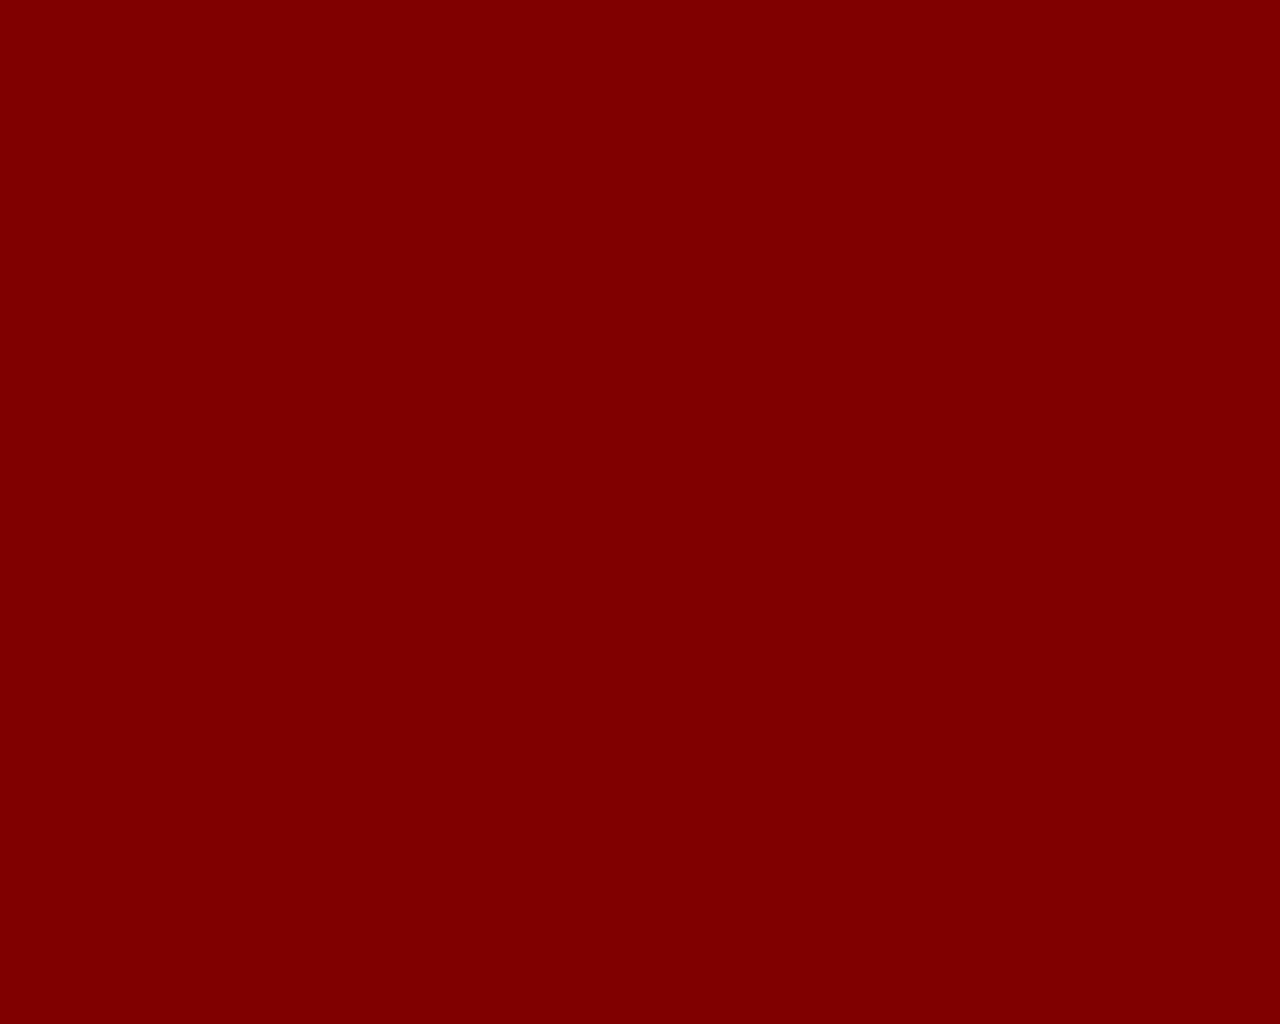 Free 1280x1024 resolution Maroon Web solid color background view and